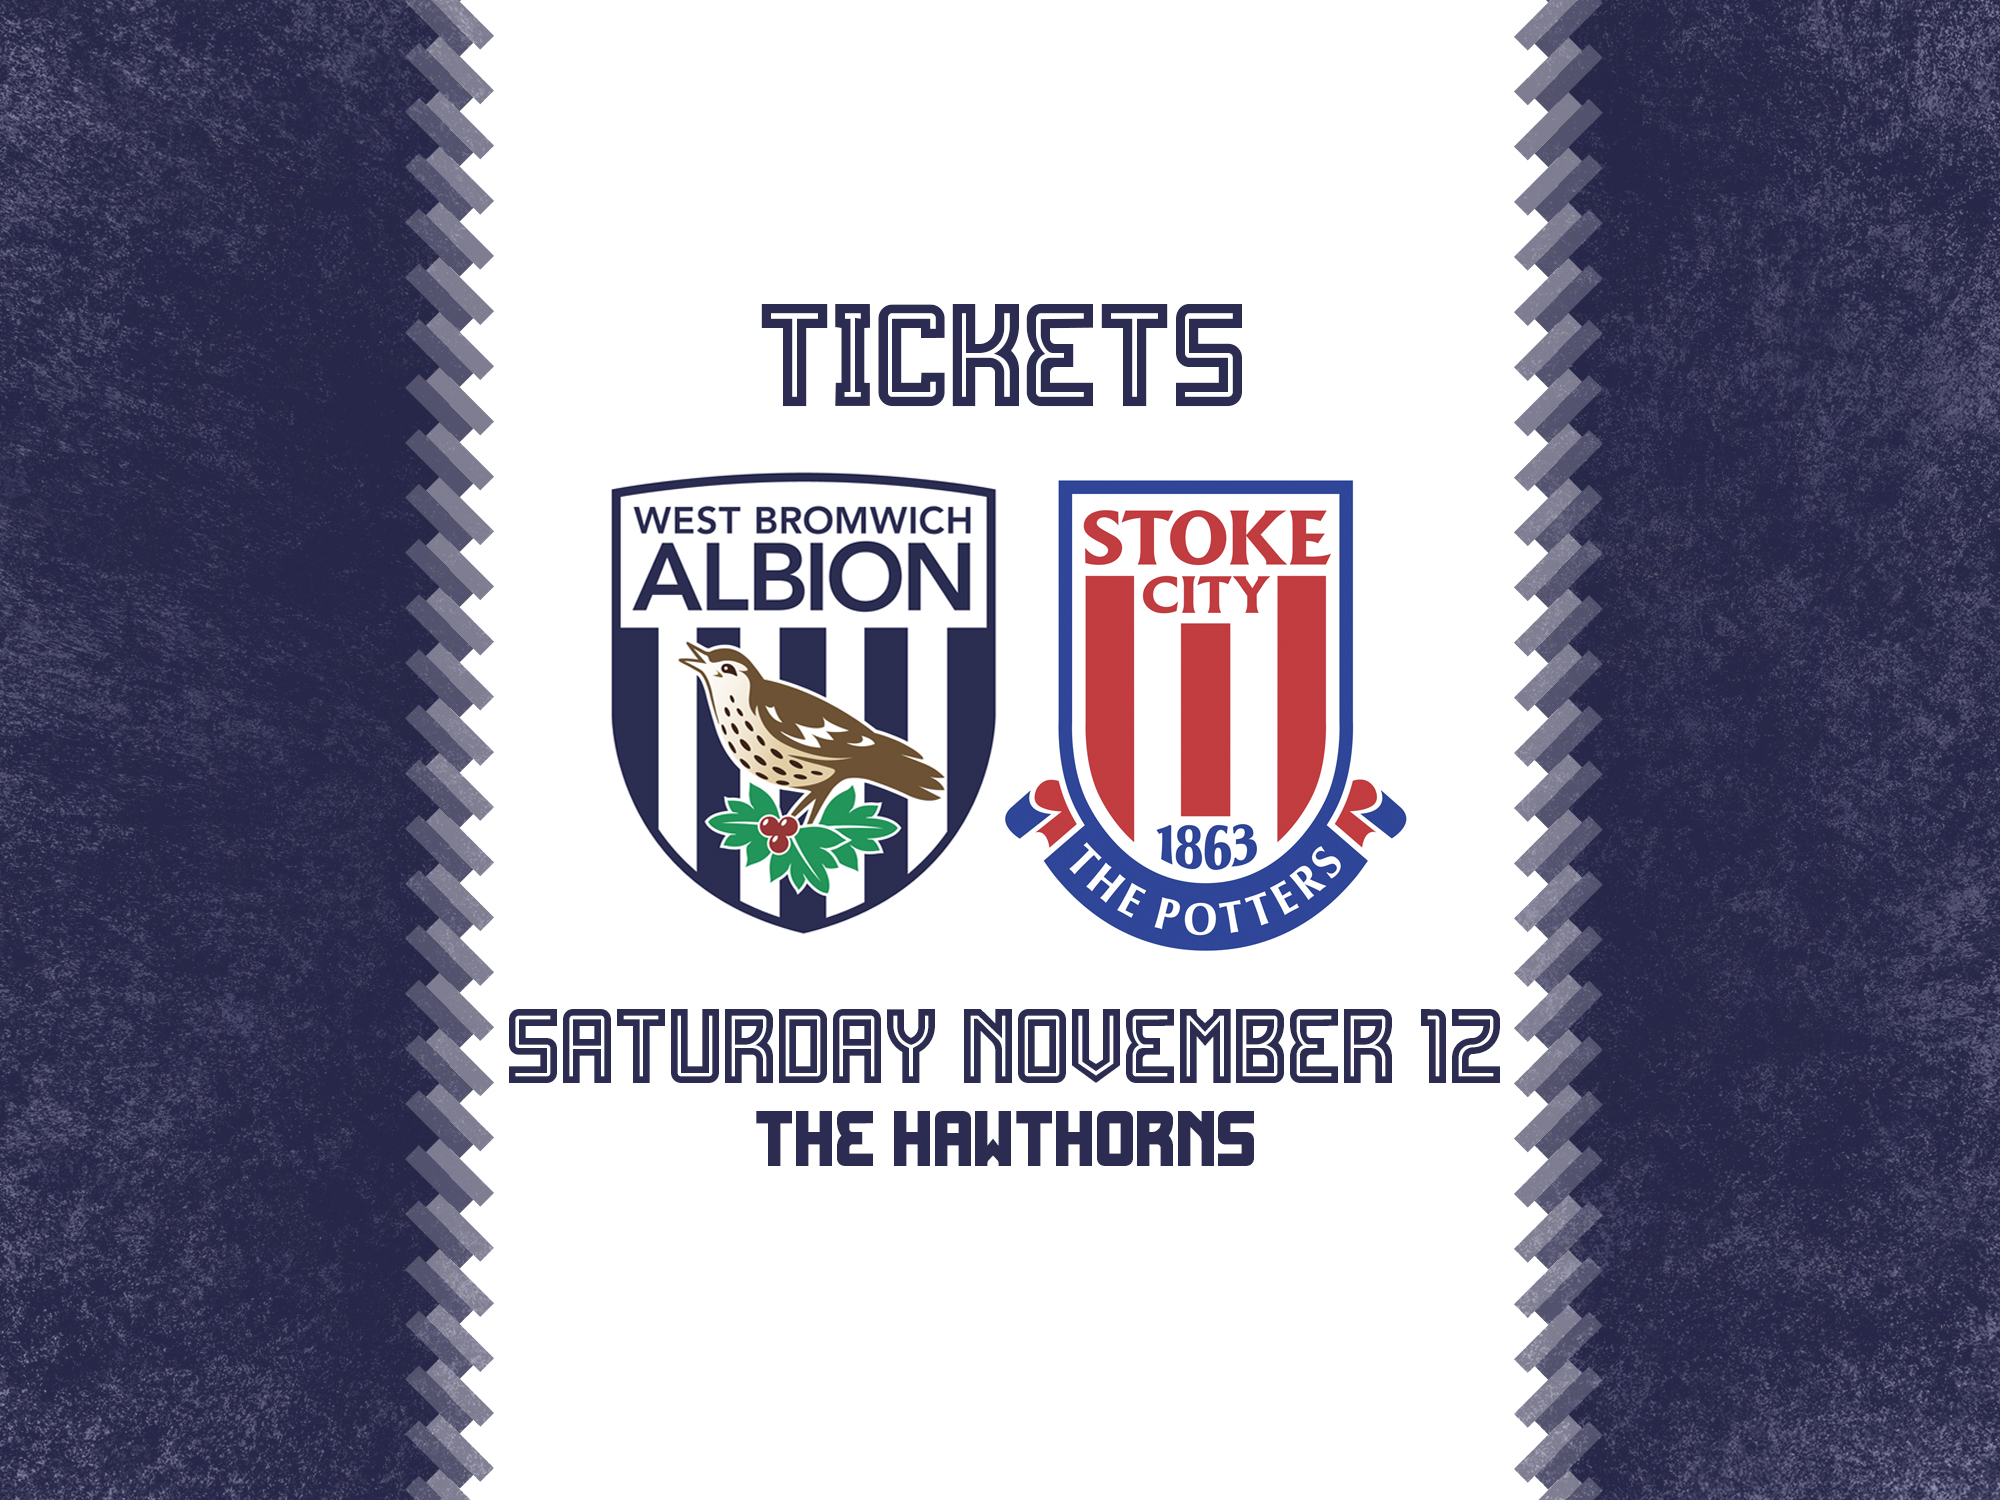 A ticket graphic displaying Albion's badge alongside Stoke City's, as well as the date of the game - Saturday, November 12